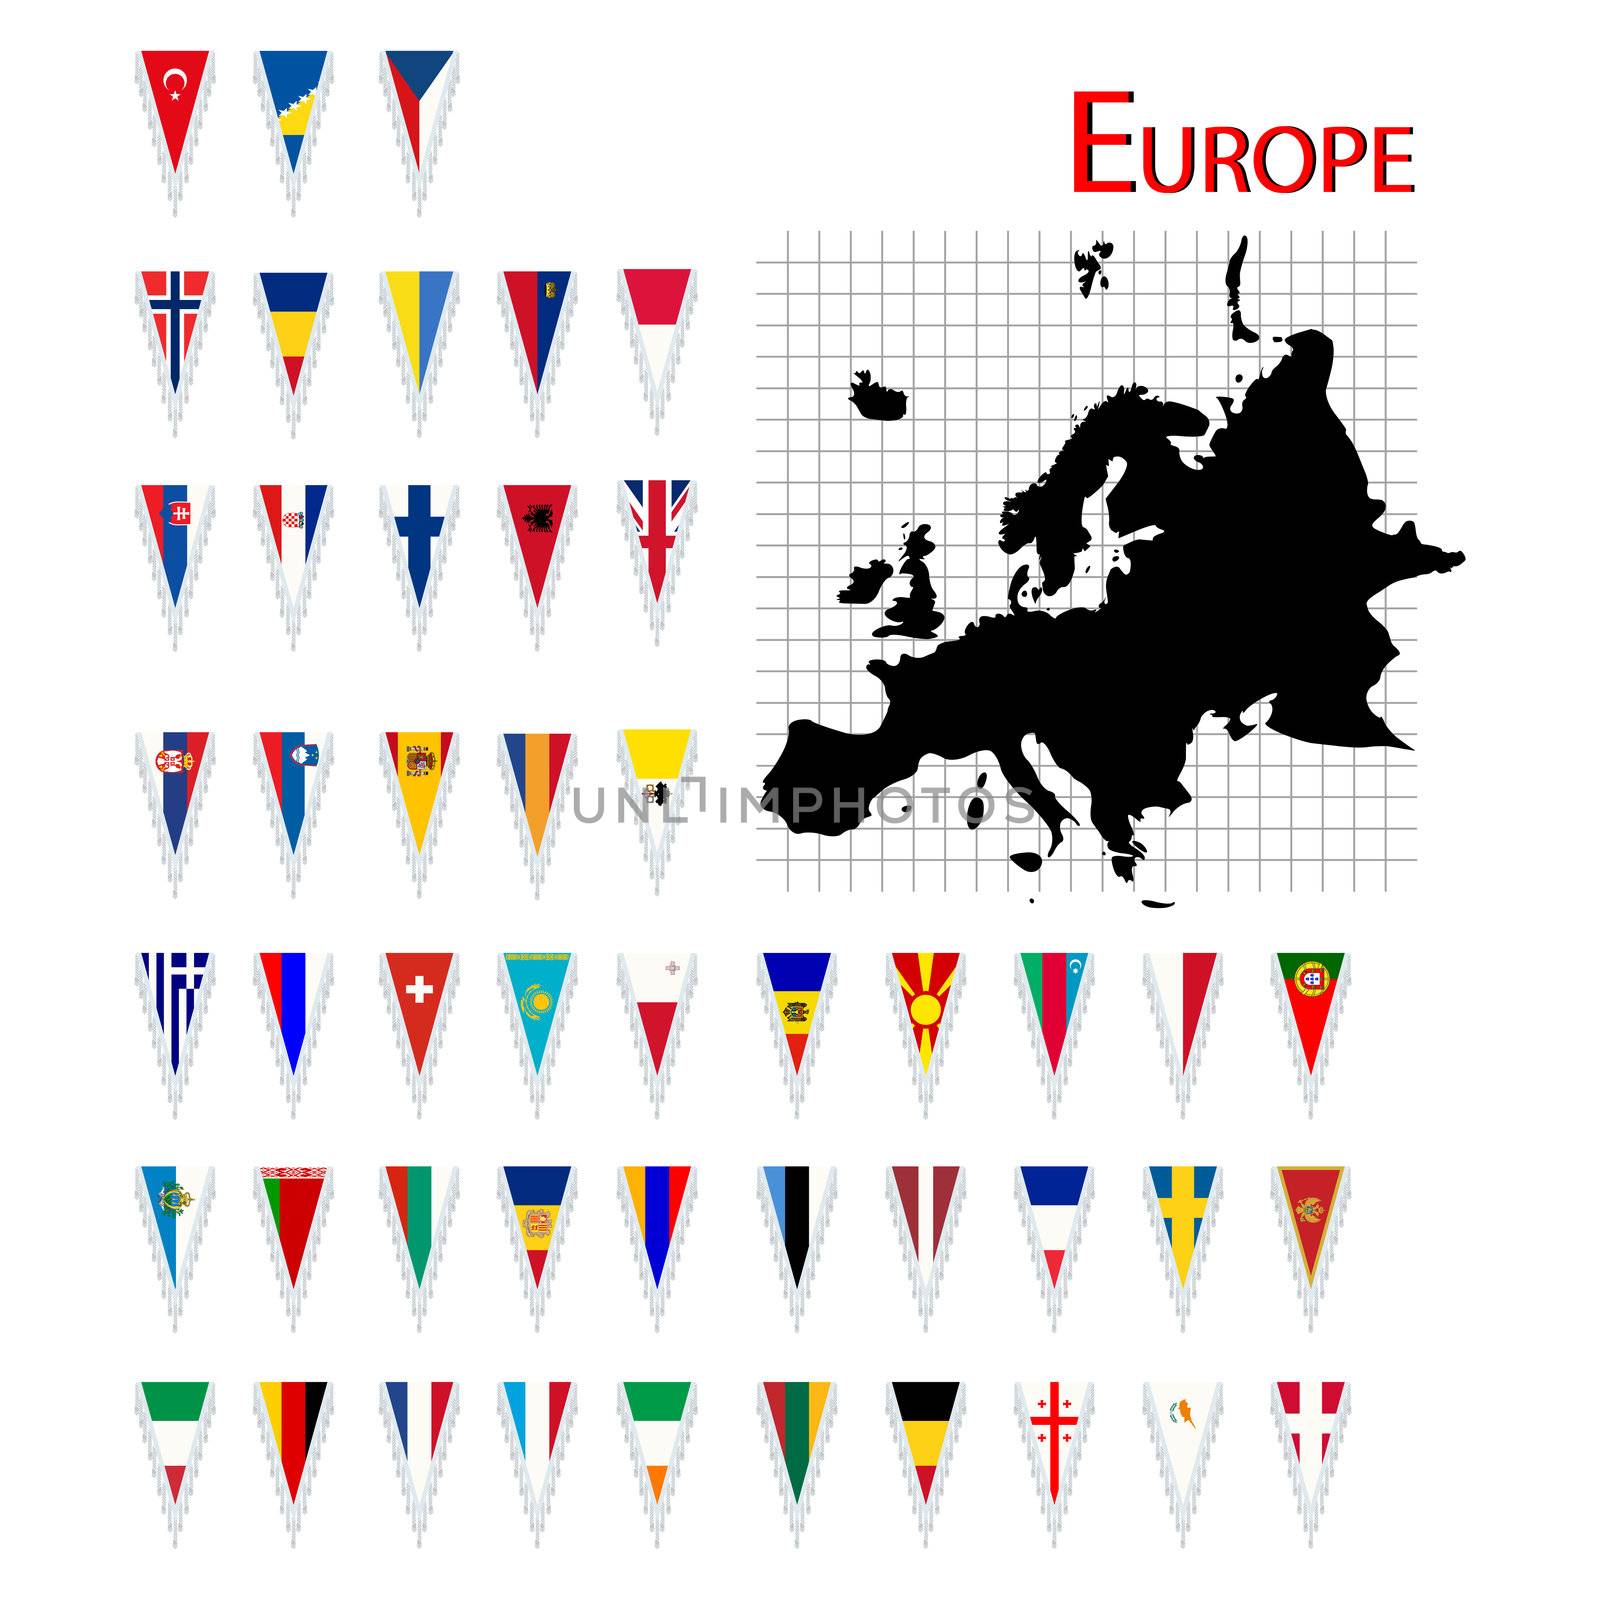 Complete set of Europe flags and map, isolated and grouped objects over white background